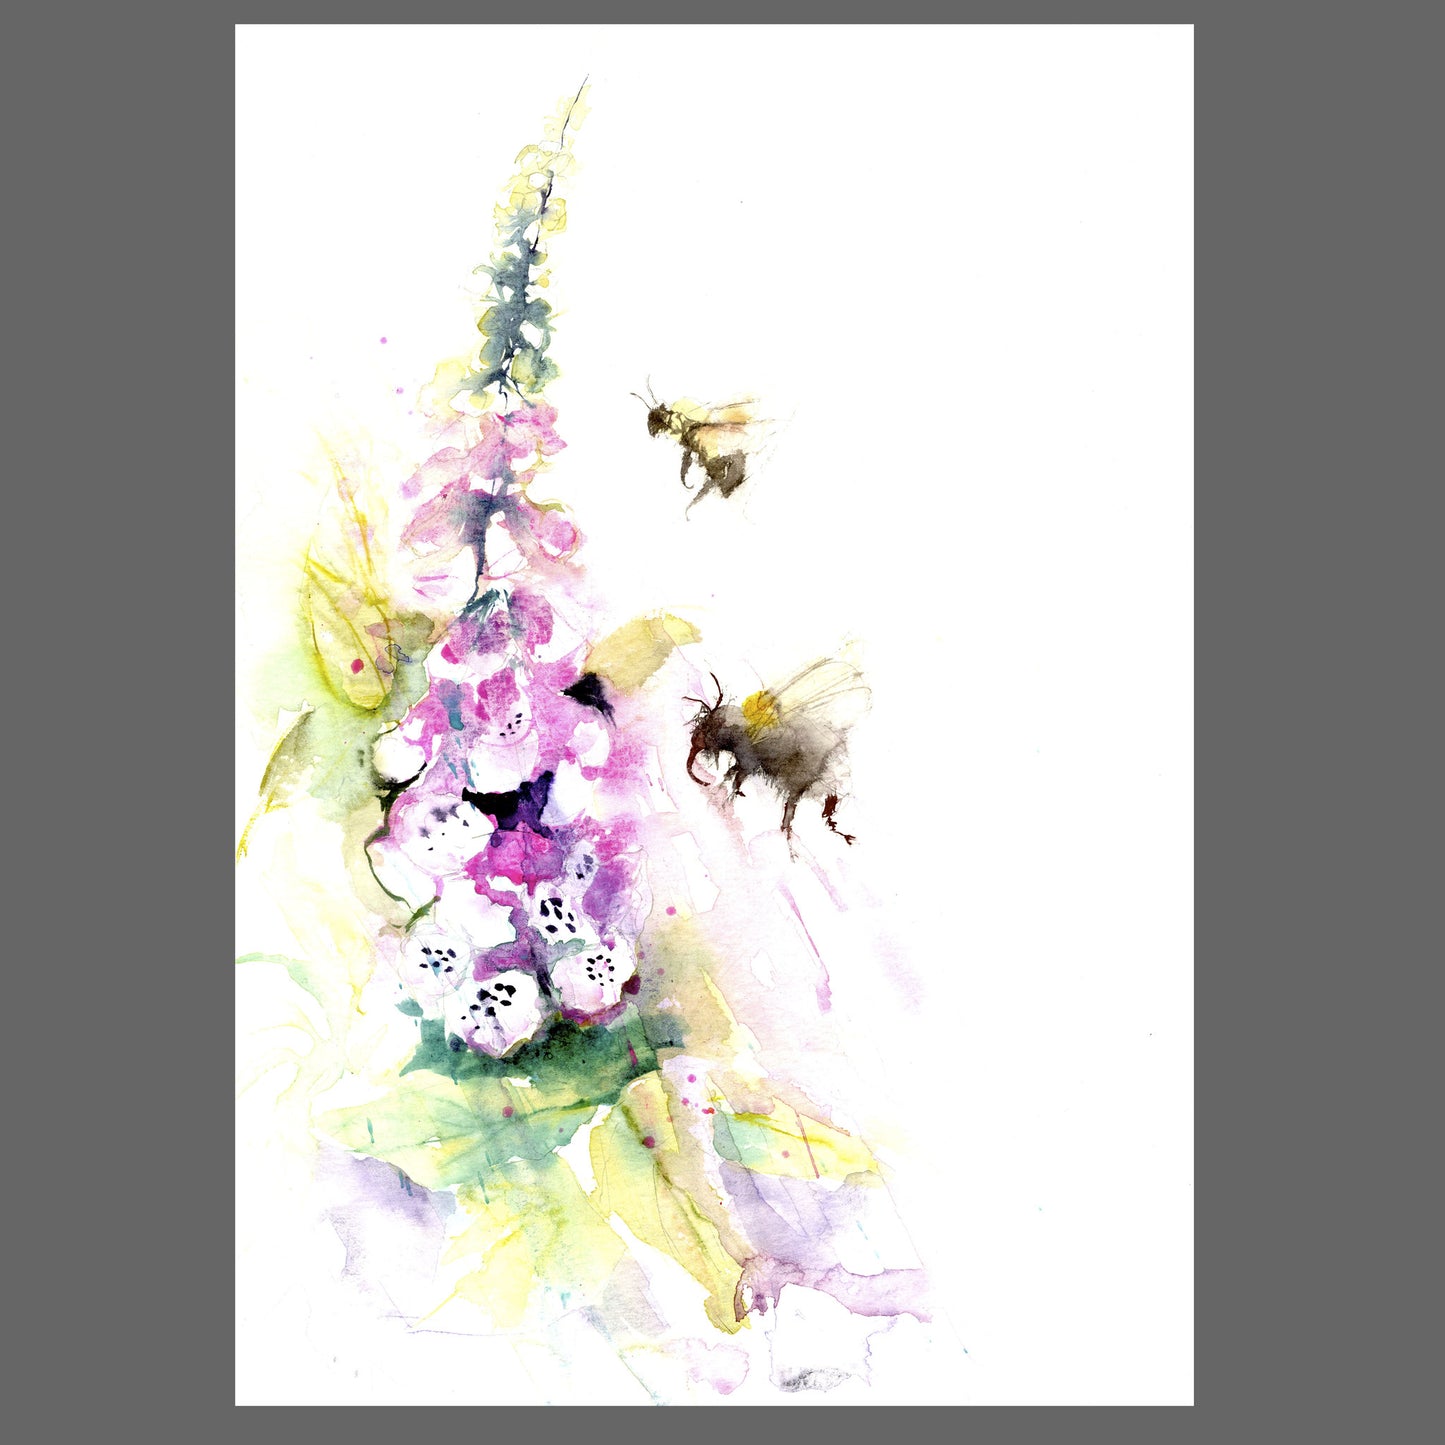 LIMITED EDITON PRINT of my original BUMBLE BEES on a foxglove - Jen Buckley Art limited edition animal art prints